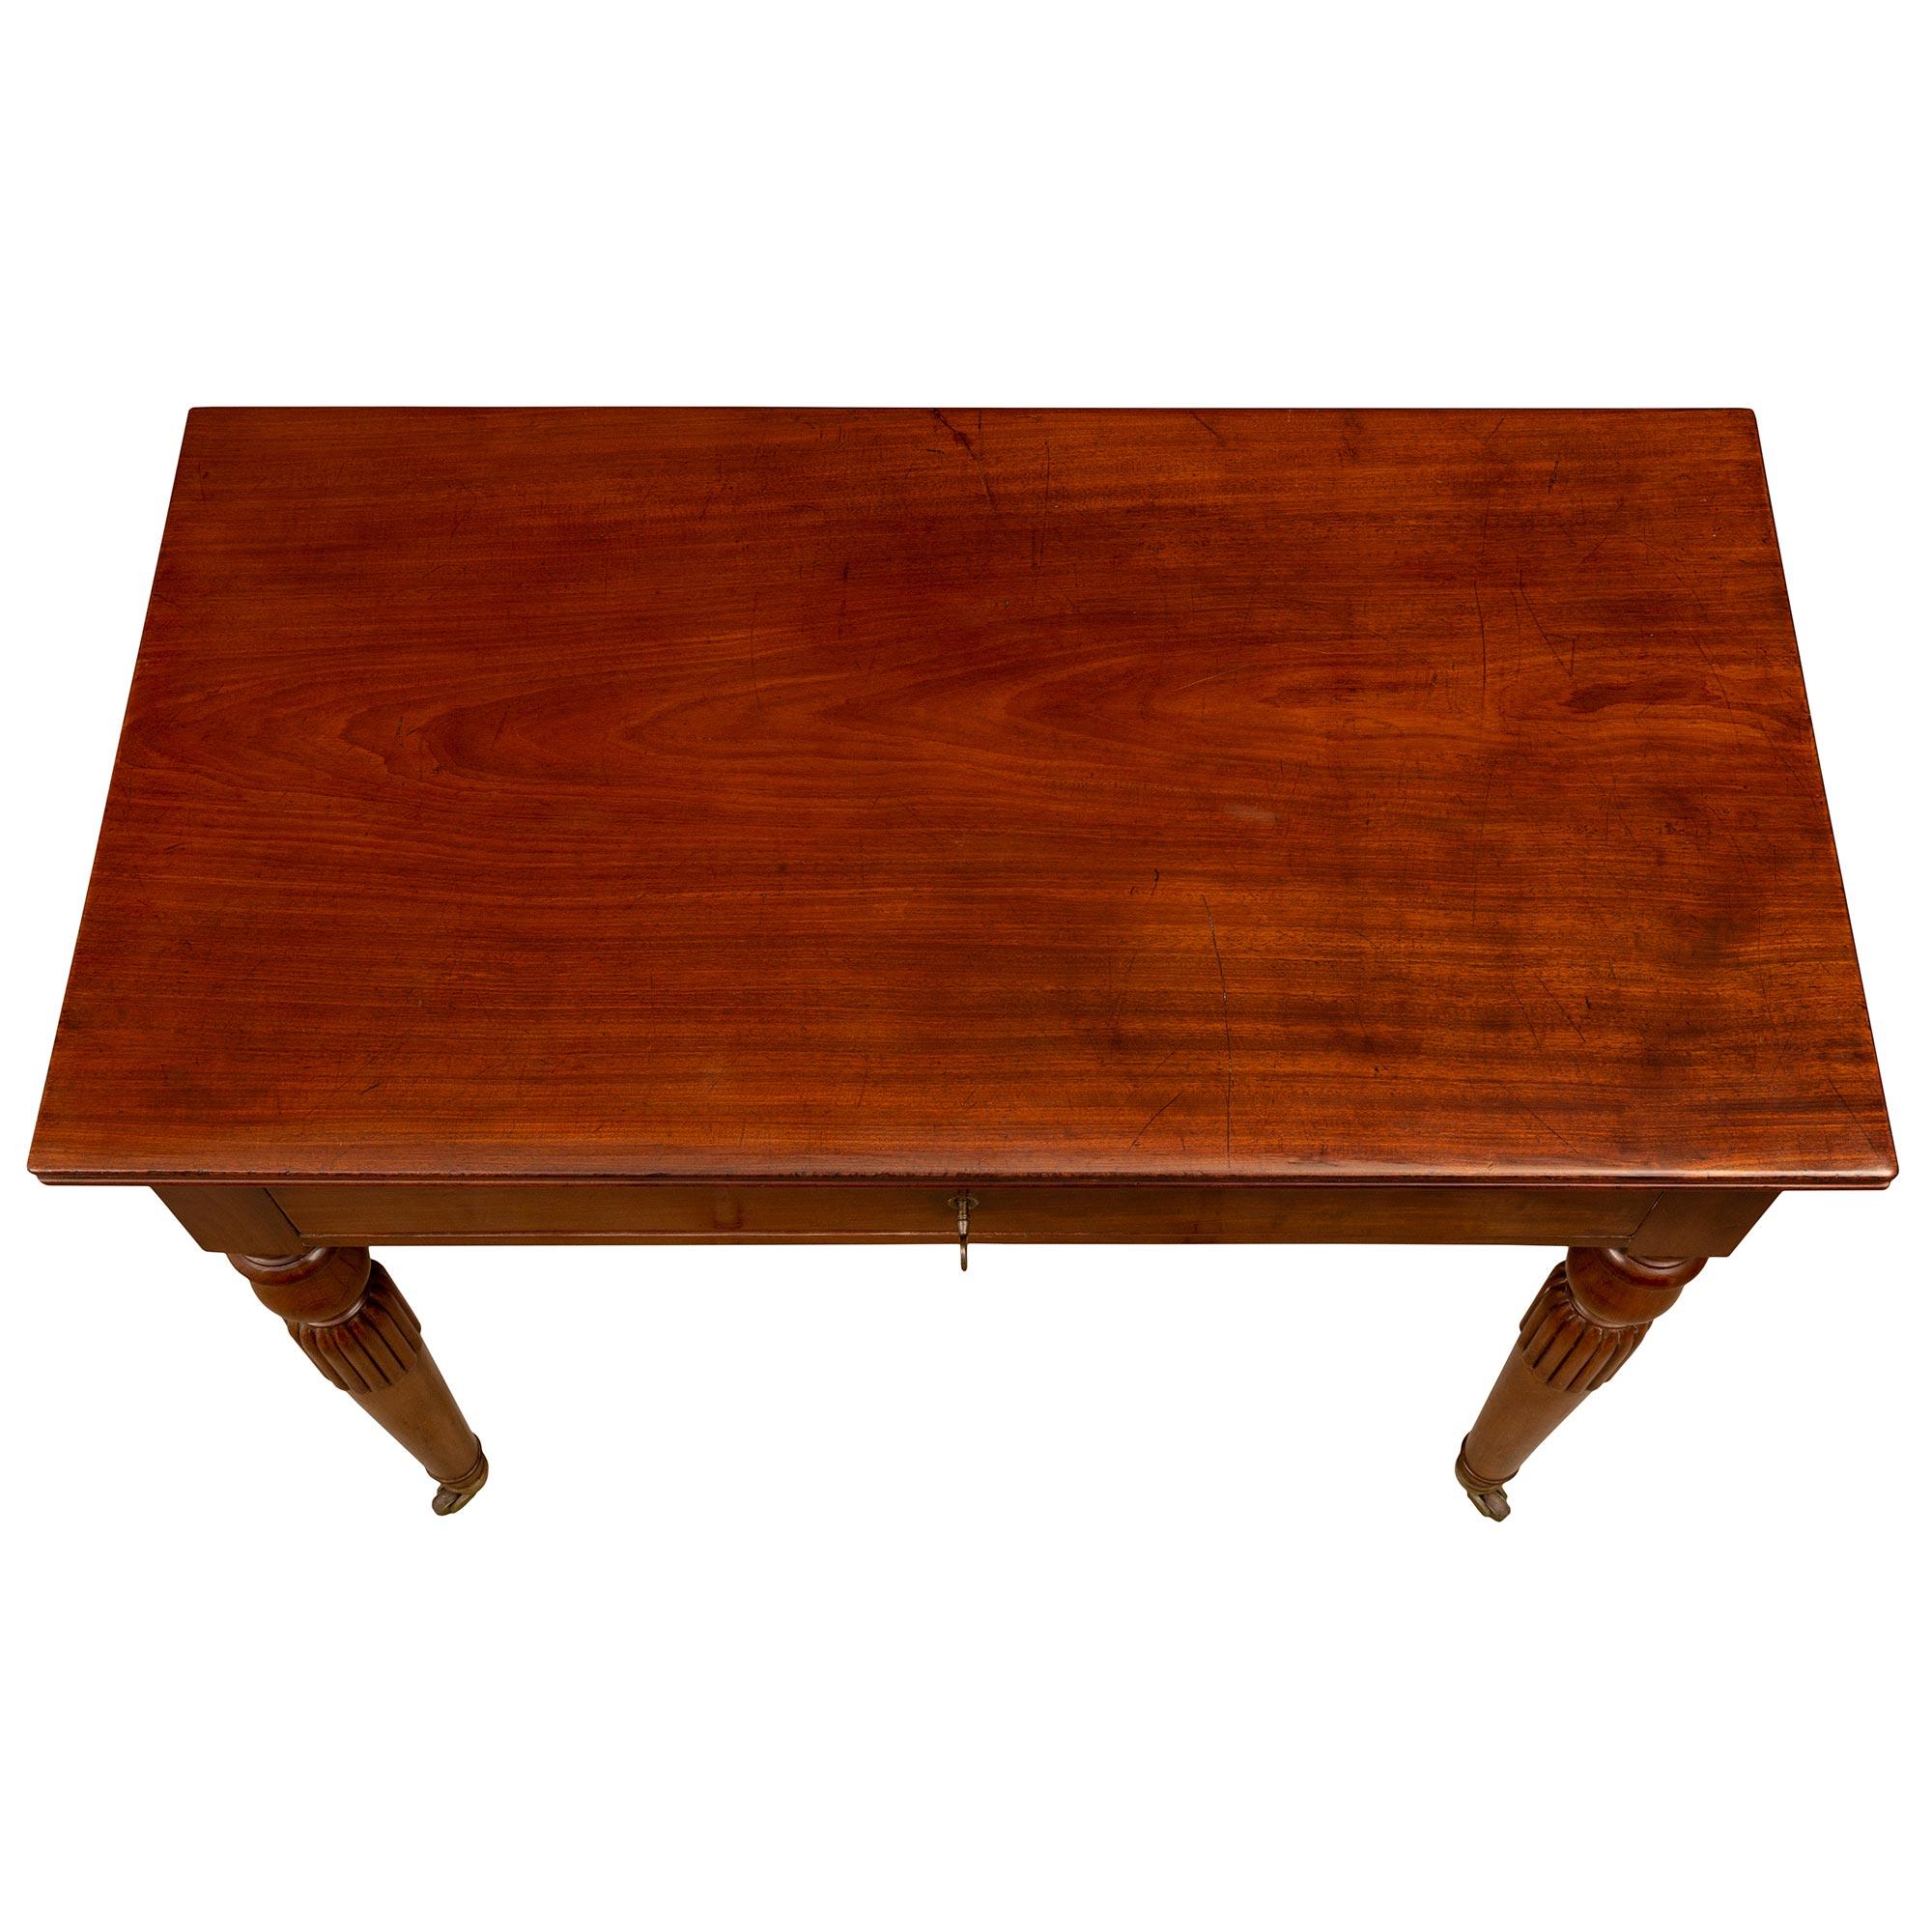 A beautiful and most unique French early 19th century Louis Philippe period Mahogany side table/desk. The desk is raised by elegant tapered turned circular legs with their original casters and an exceptional reeded and mottled design below the